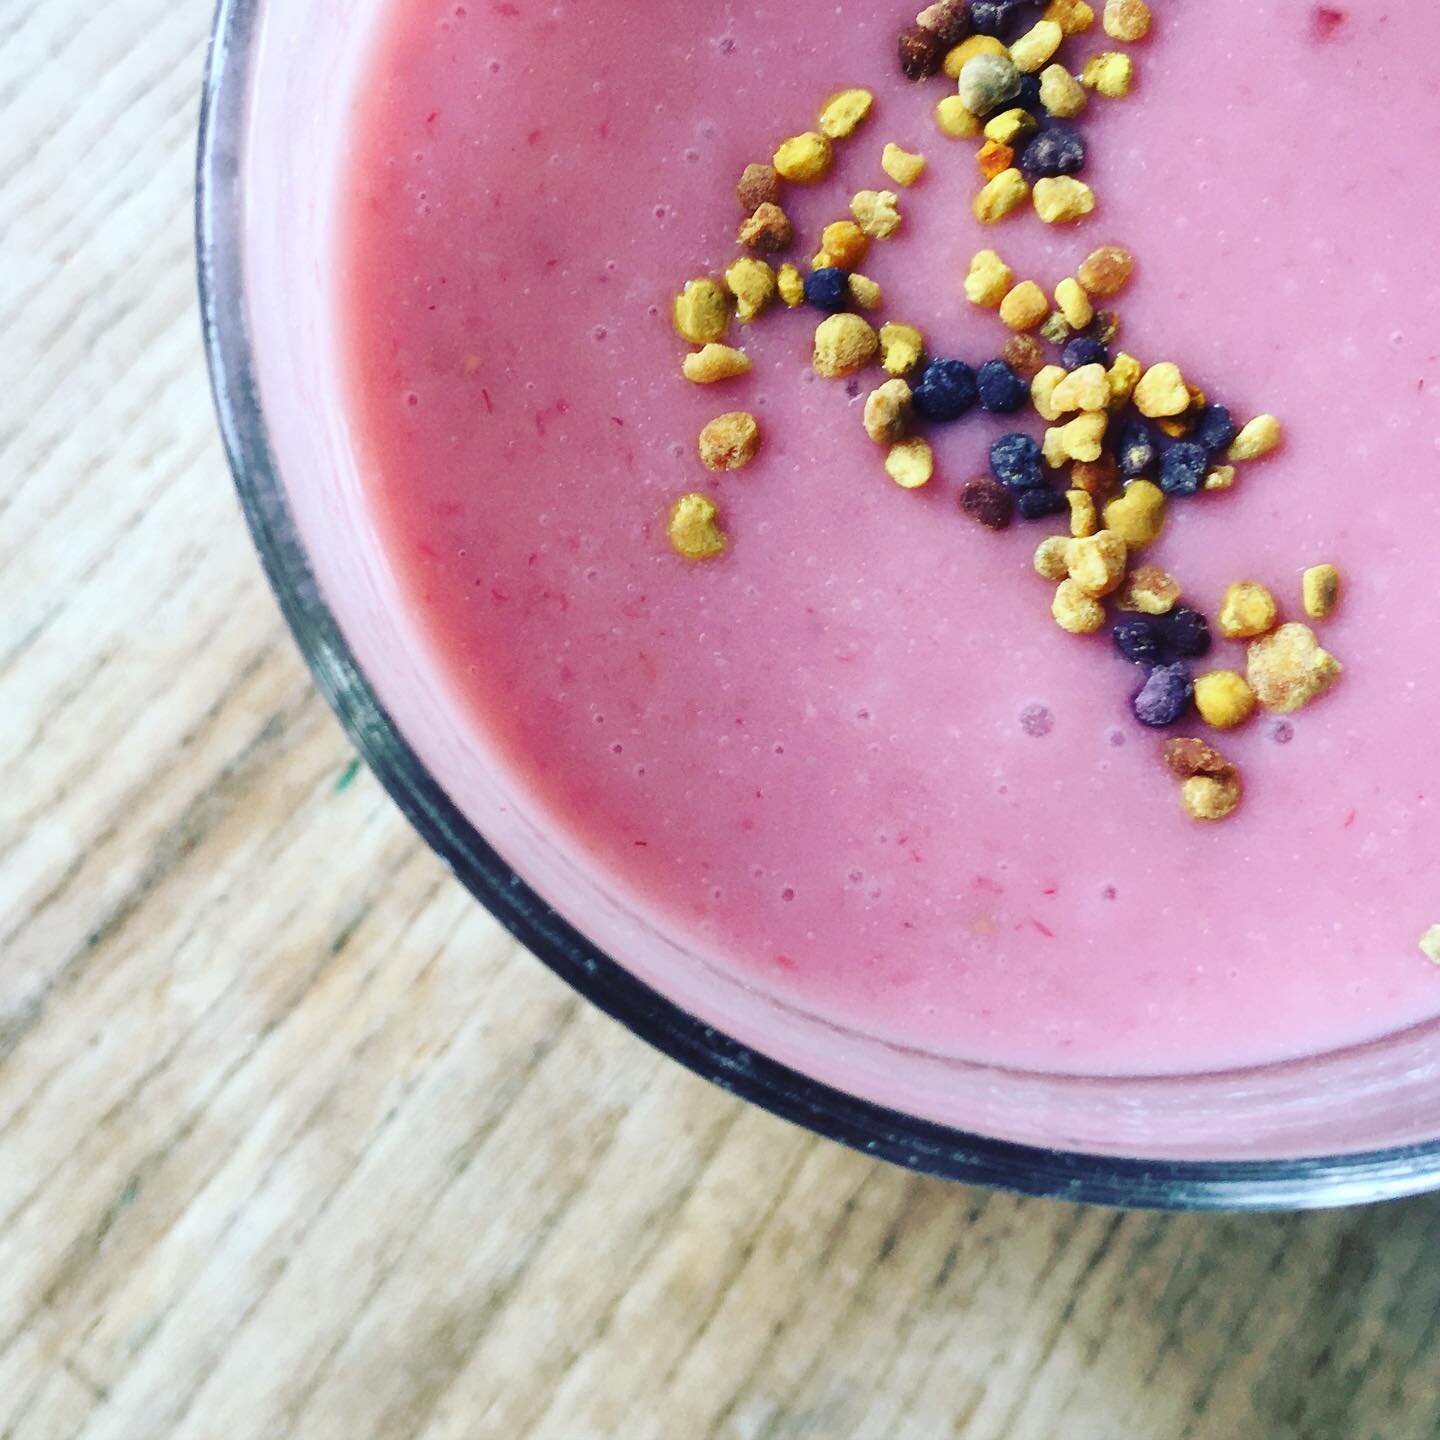 Berry smoothie for breakfast with bee pollen #castlecombe #bedandbreakfastuk #bedandbreakfast #staycation2020 #visit #retreat #escapetothecountry #smoothie #raspberry #strawberry #beepollen #goodforyou #startthedaywell